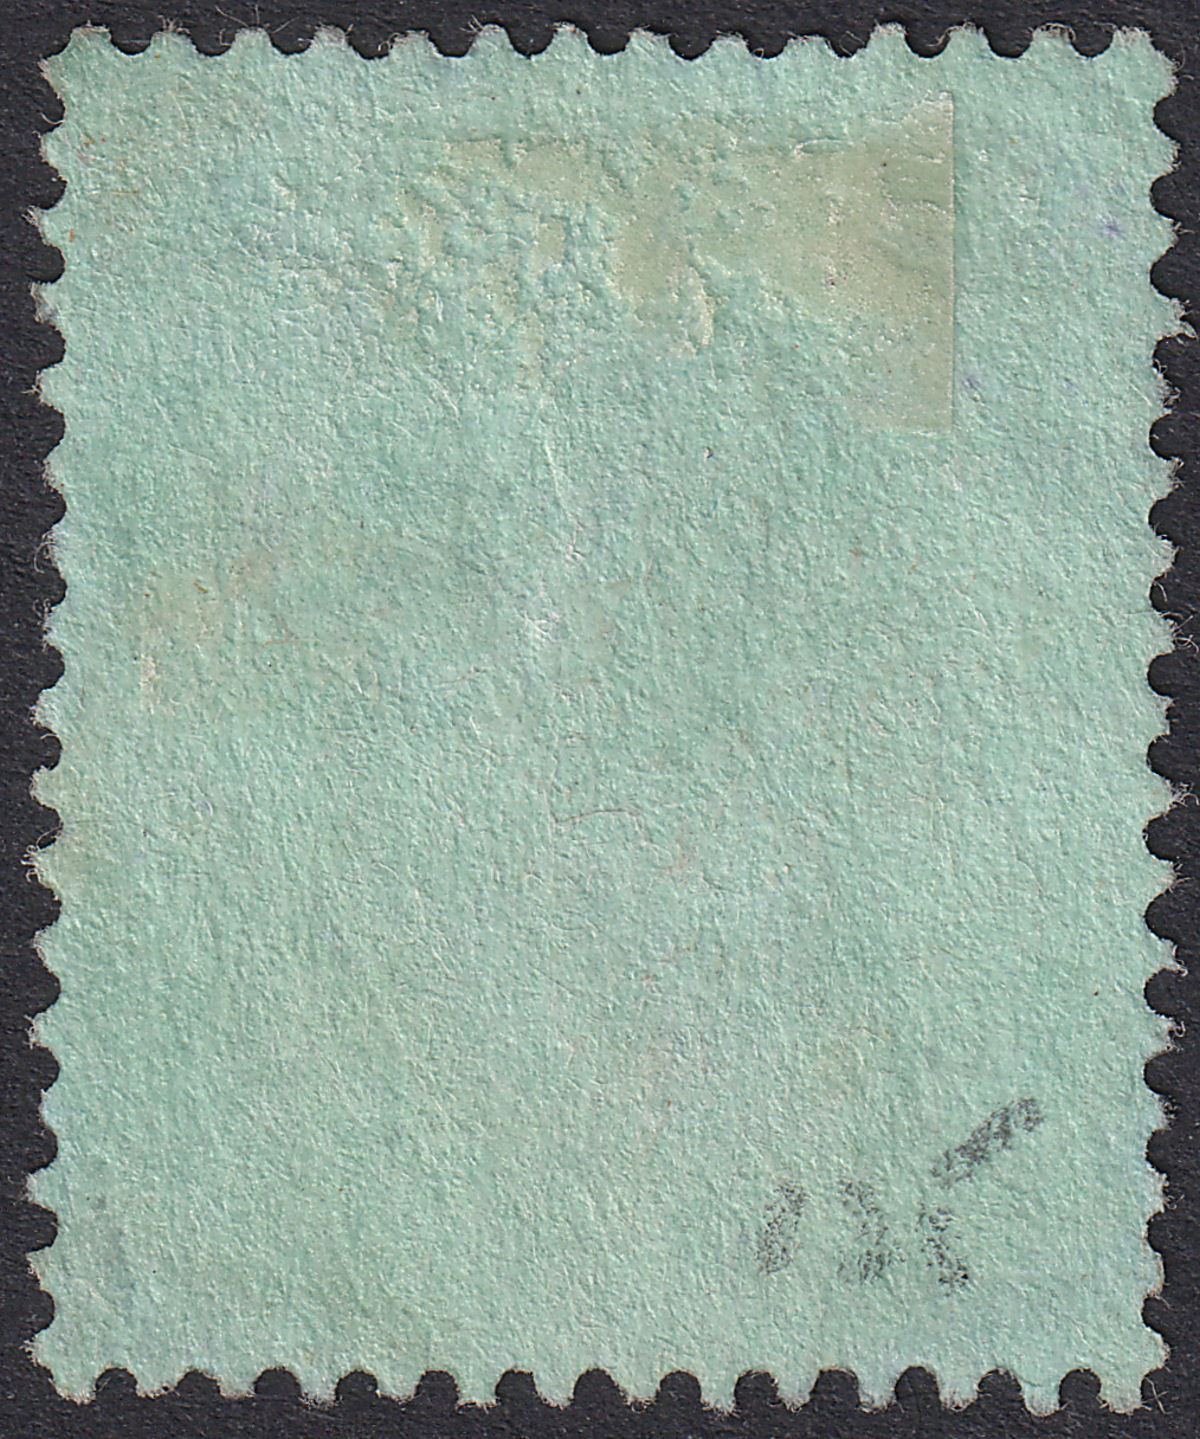 Hong Kong 1912 KEVII 50c Black on Green Used w CANTON postmark SG Z220 cat £55